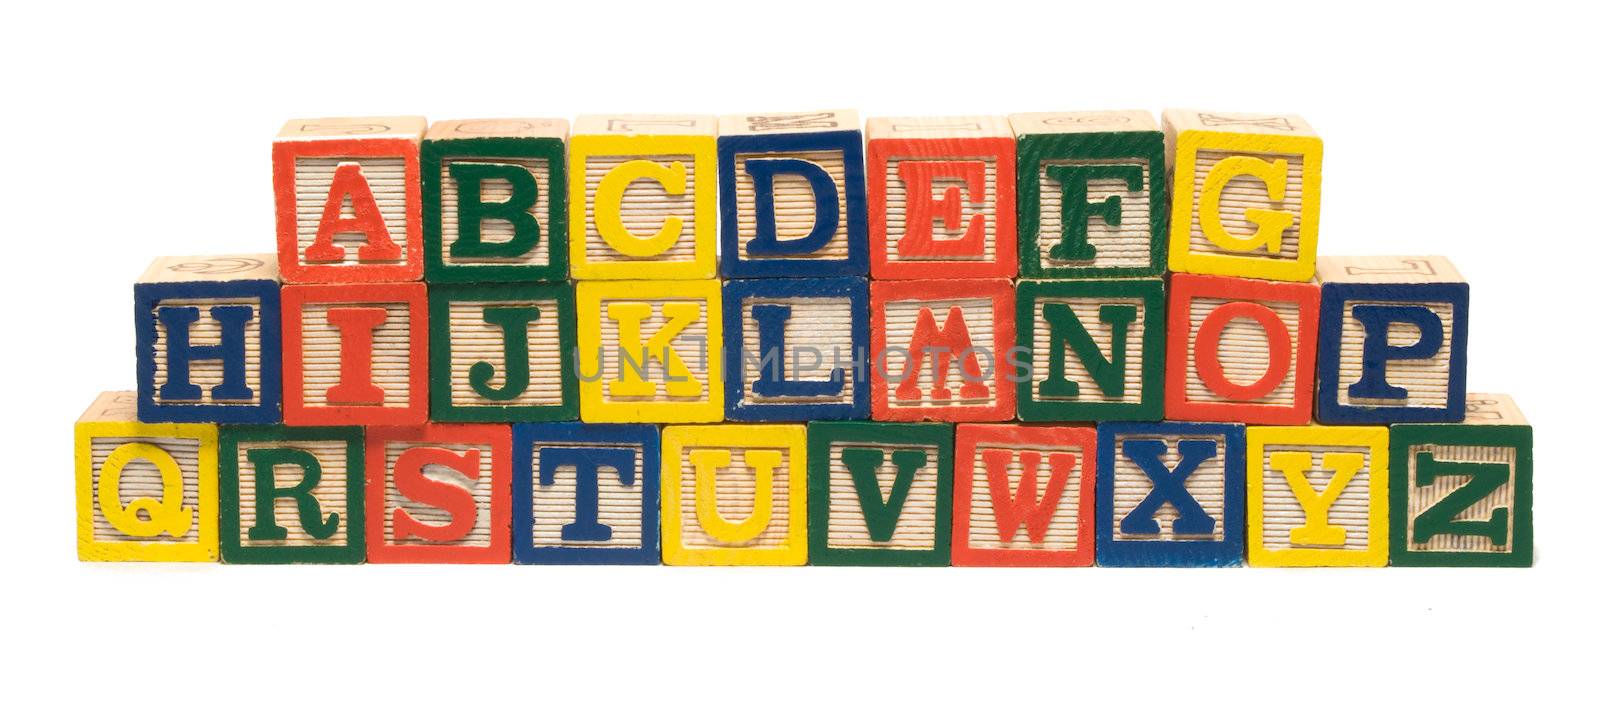 All the letters of the alphabet piled using wooden blocks